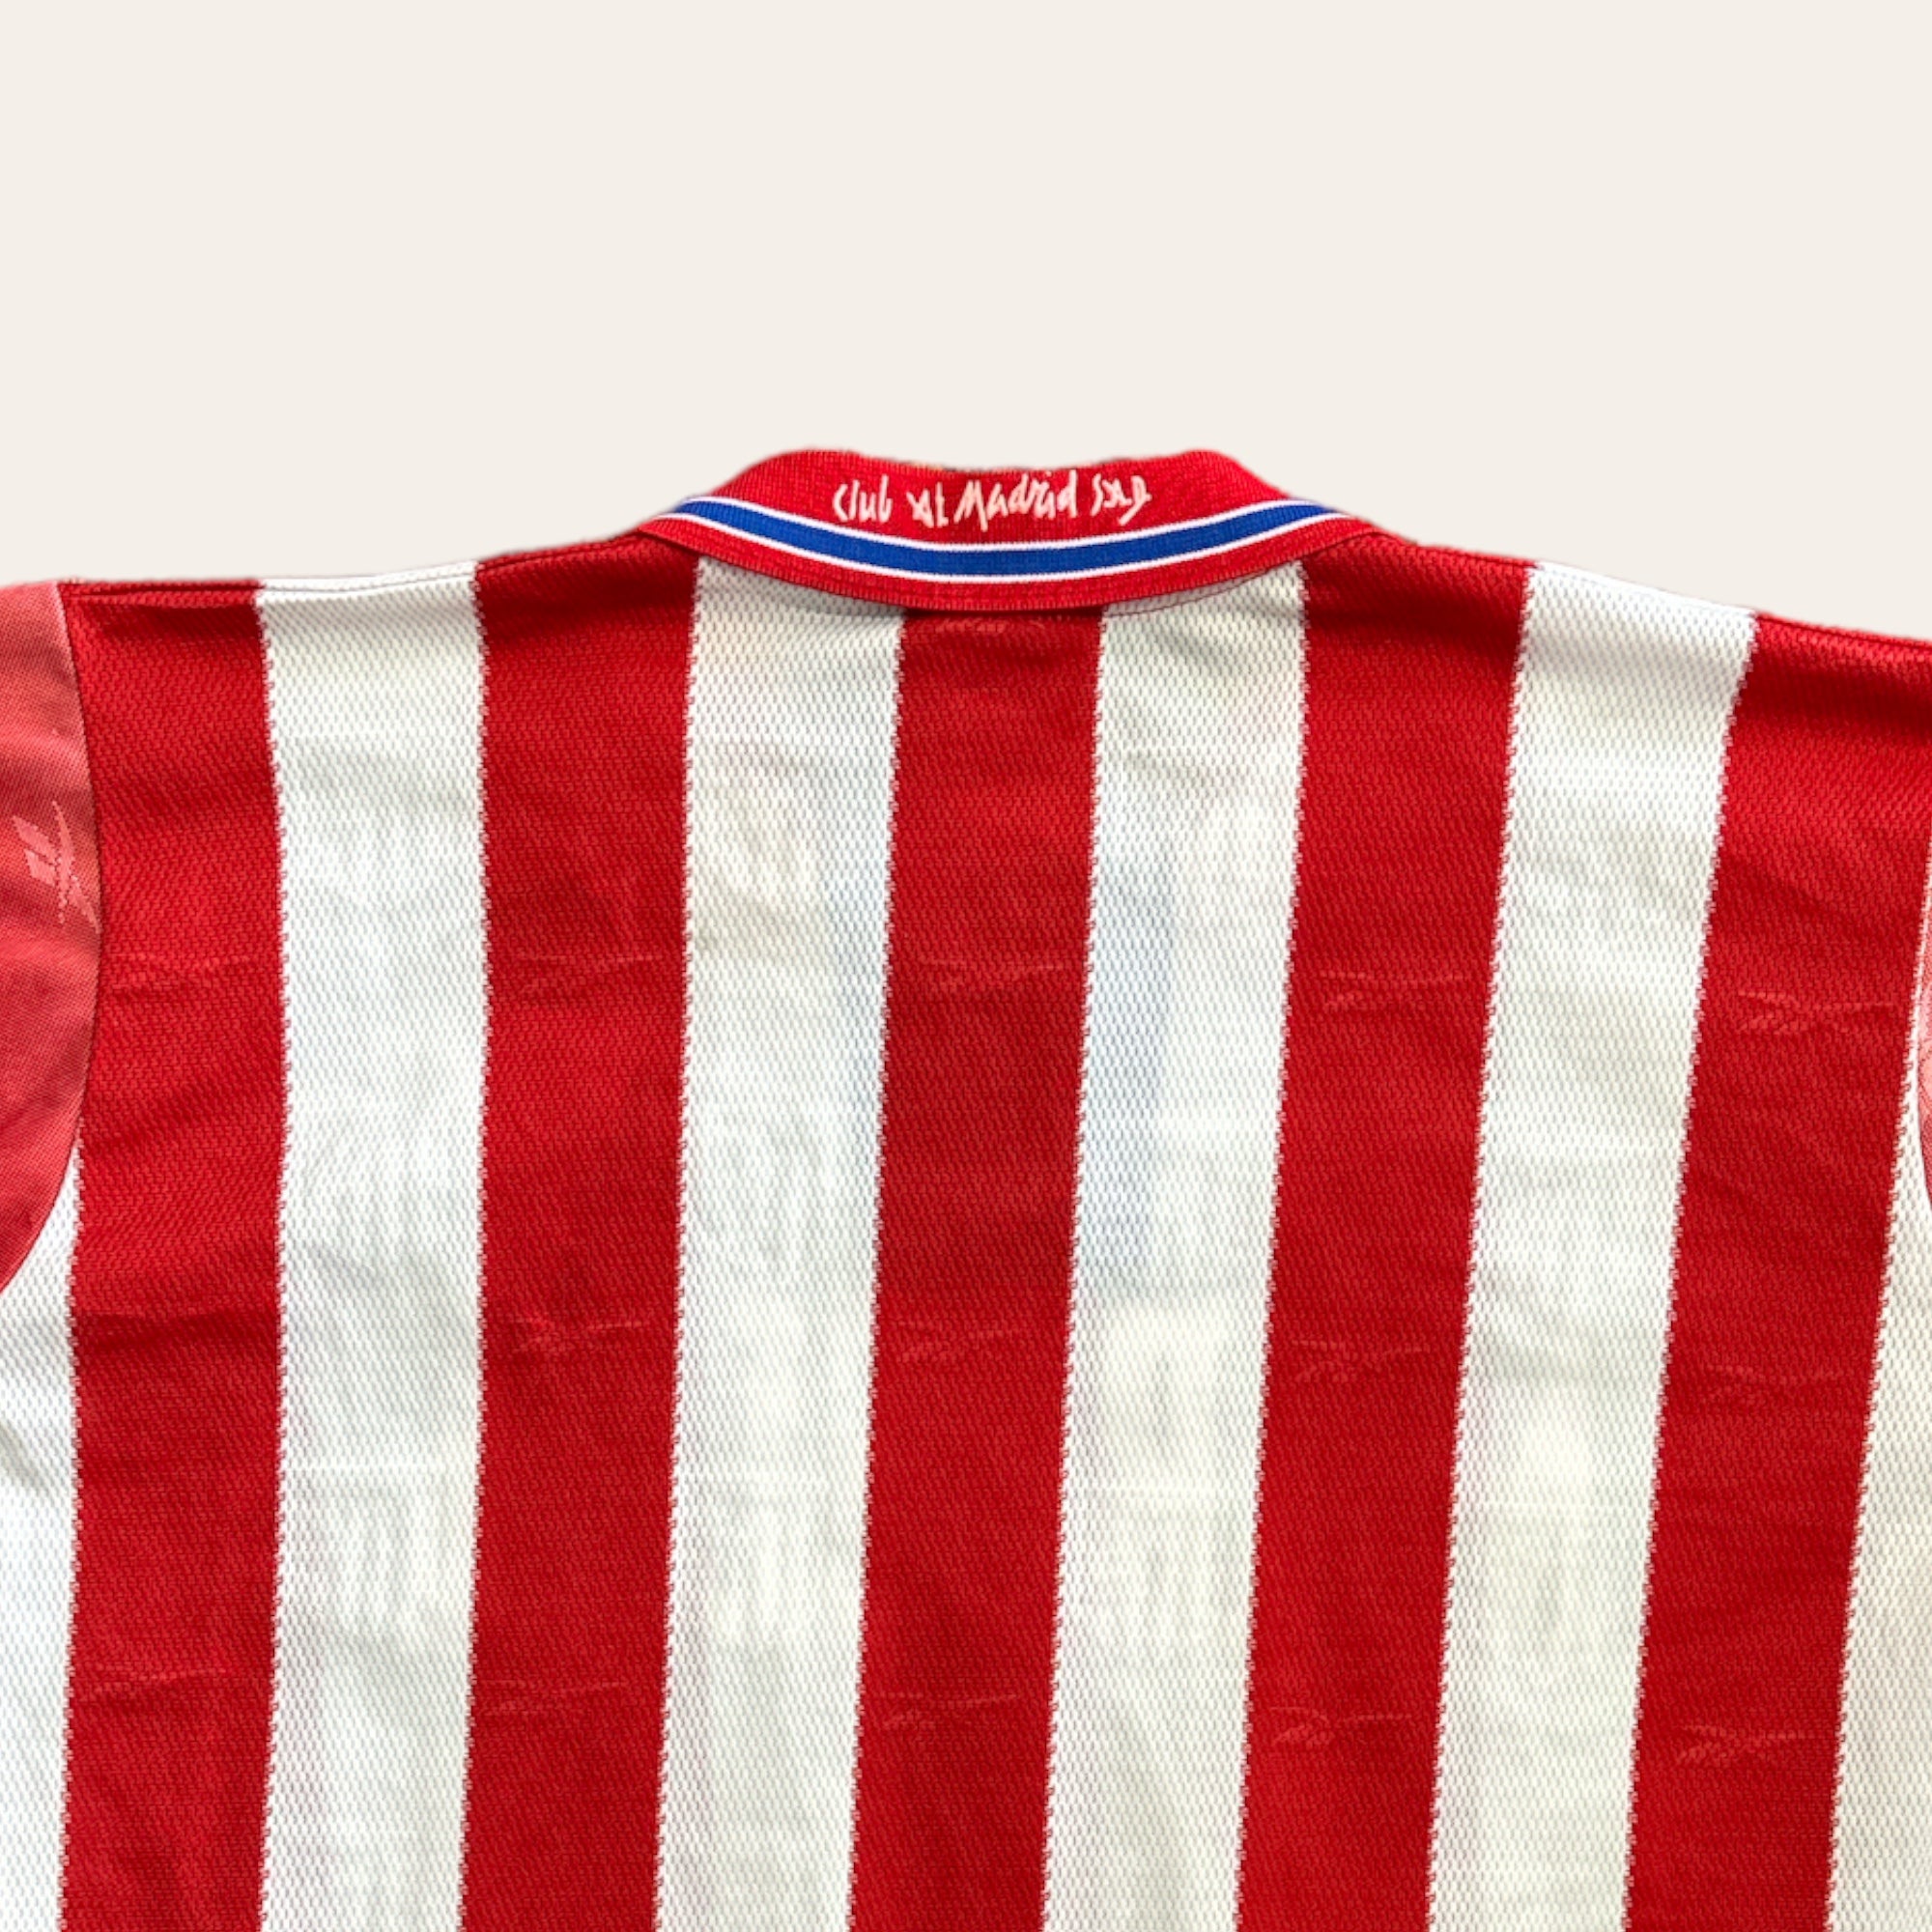 98/99 Atletico Madrid Home Kit Size XL